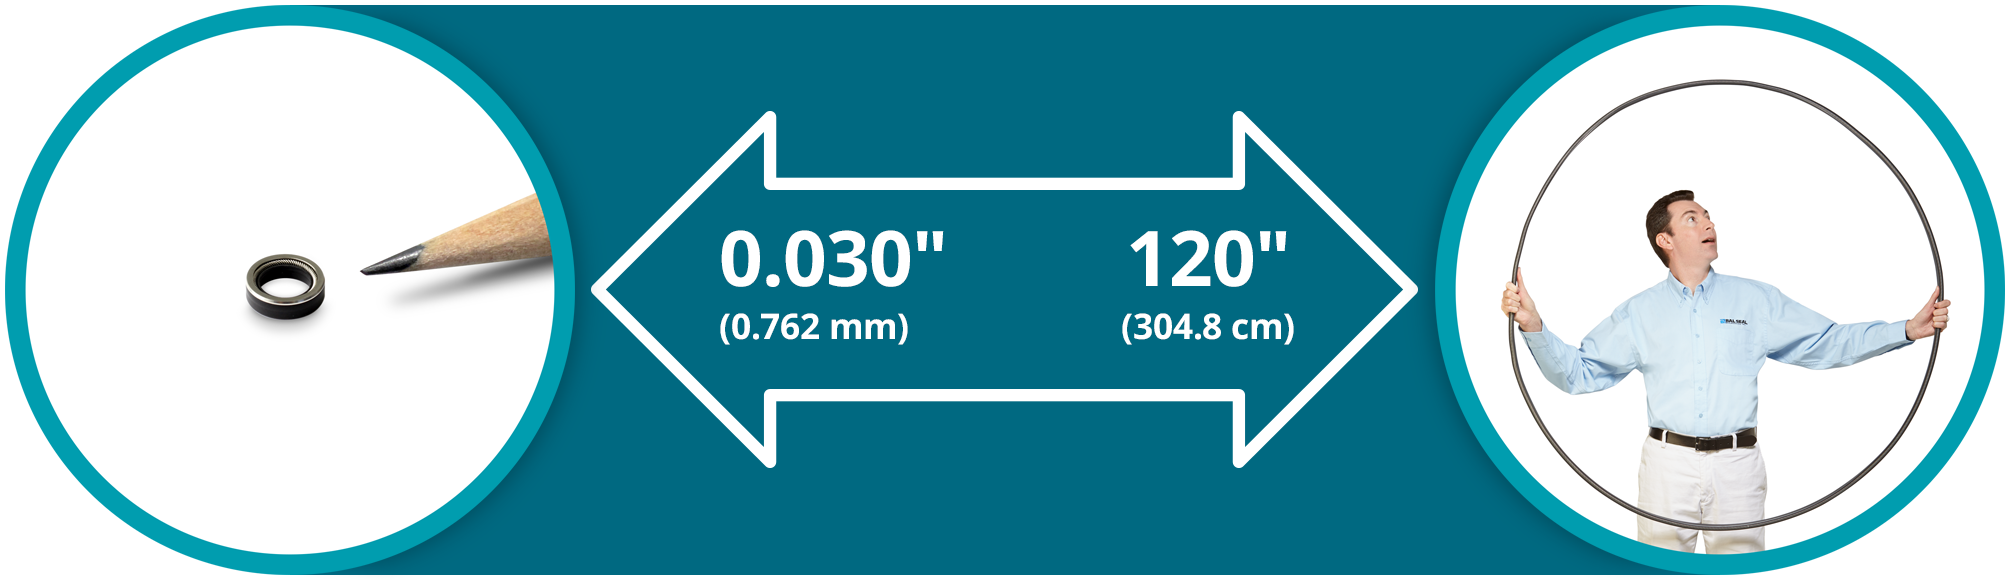 Rotary Seal Sizes